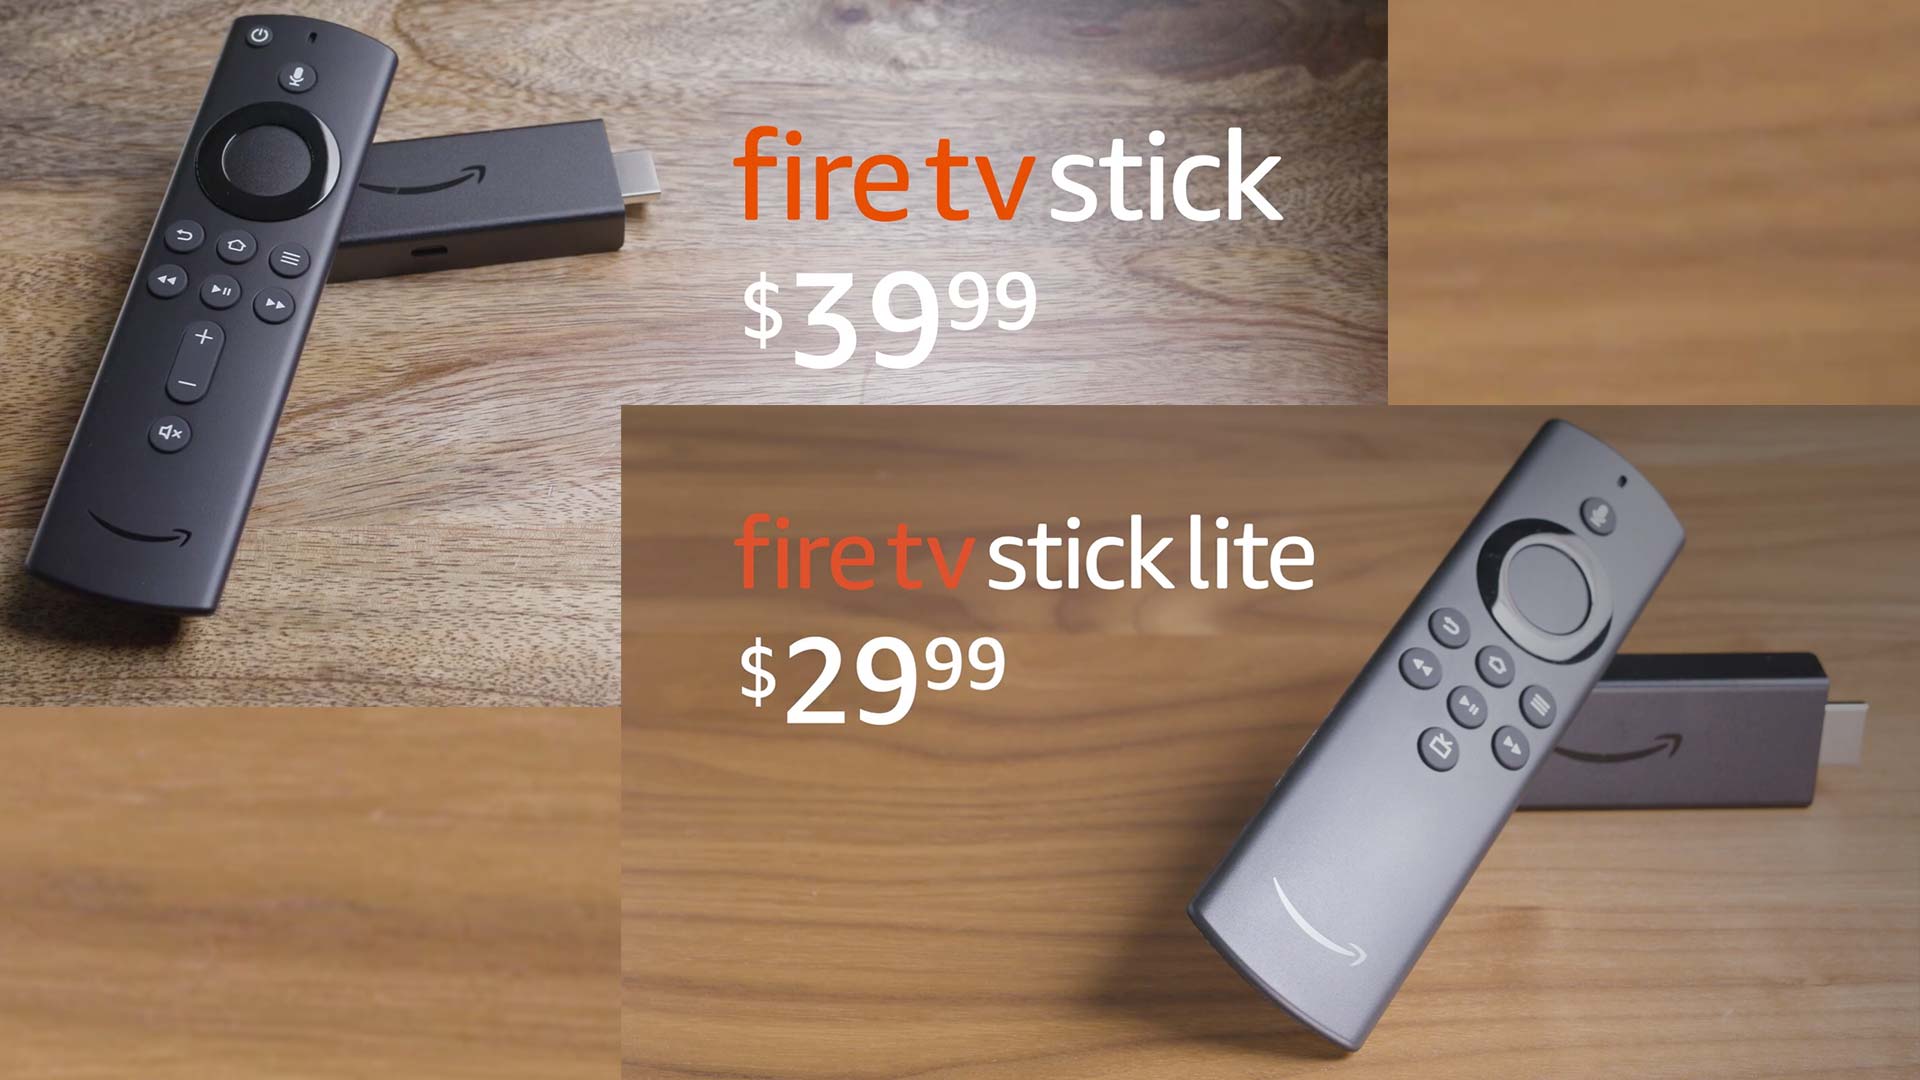 Amazon Announces The New Fire Tv Stick And Fire Tv Stick Lite Wikiwax